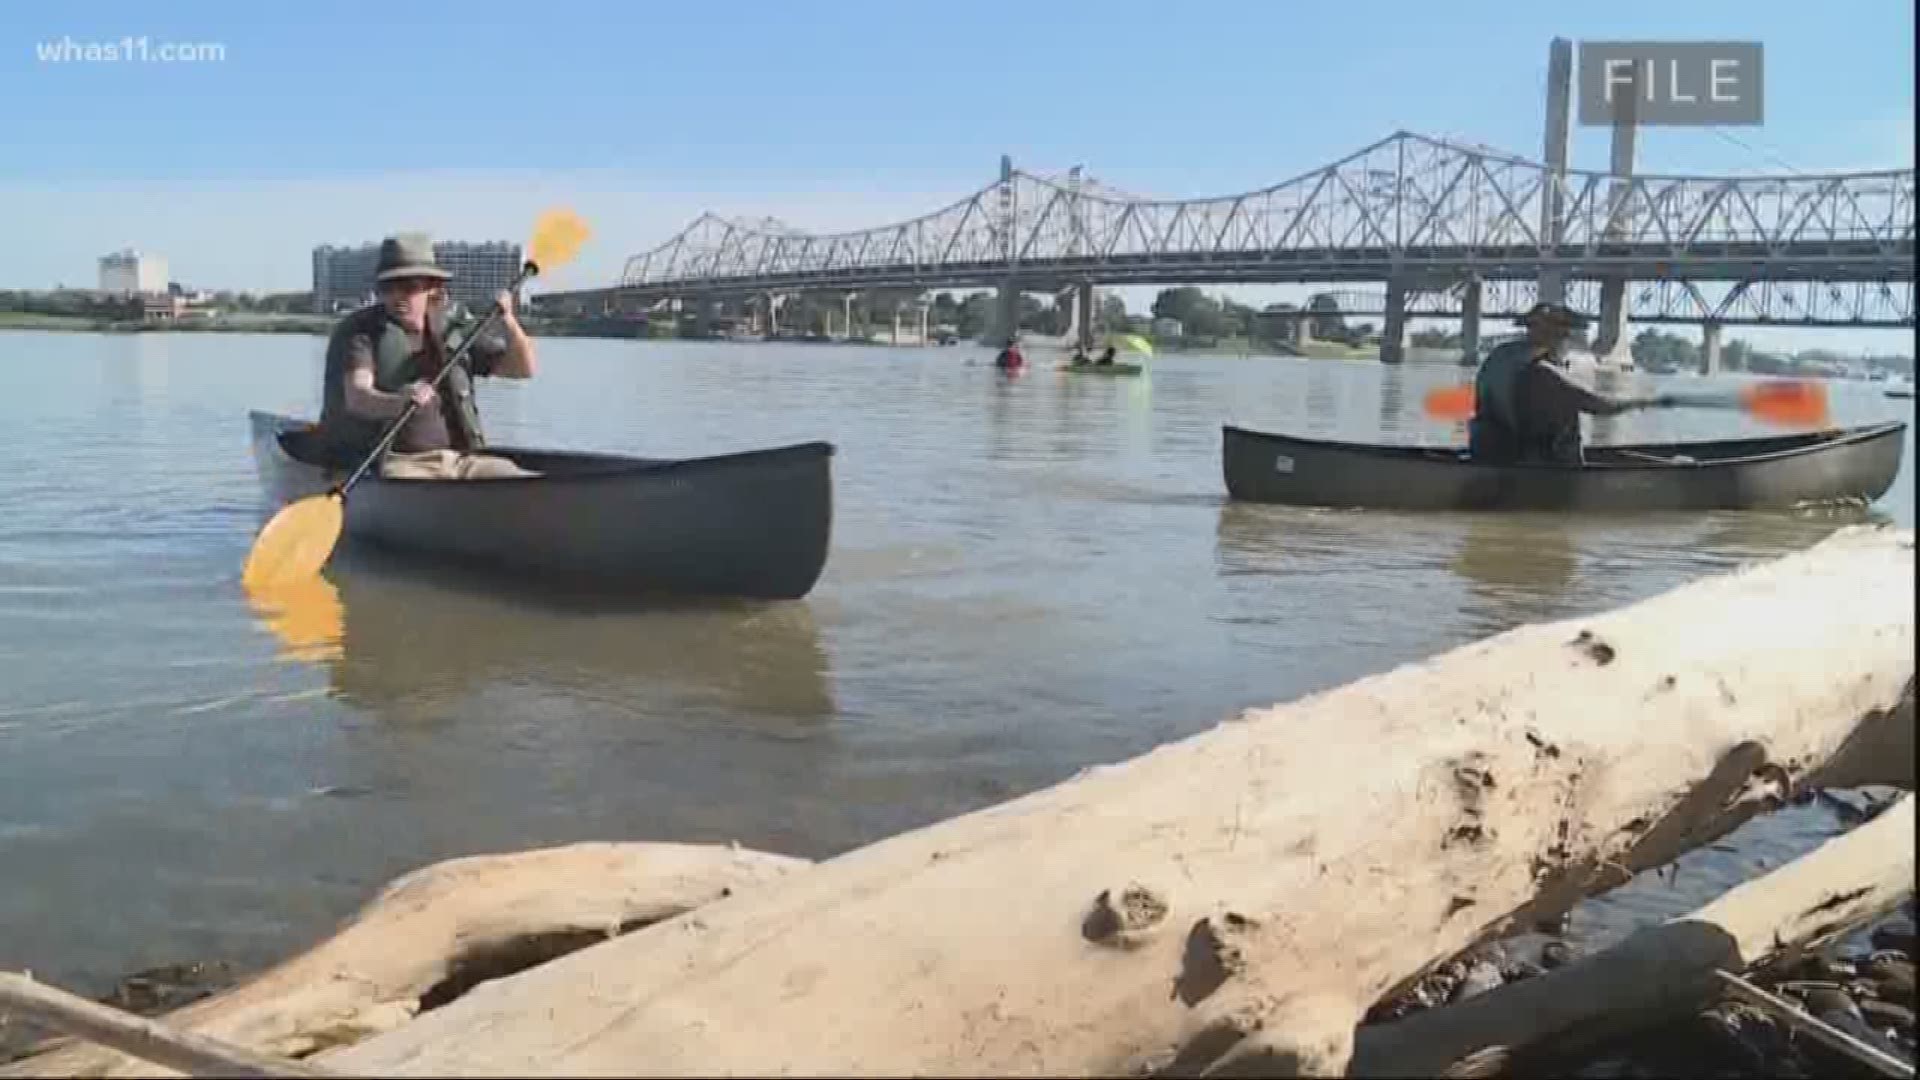 Hike, Bike and Paddle takes place on Labor Day, and state officials are reminding people to be careful while on the water.